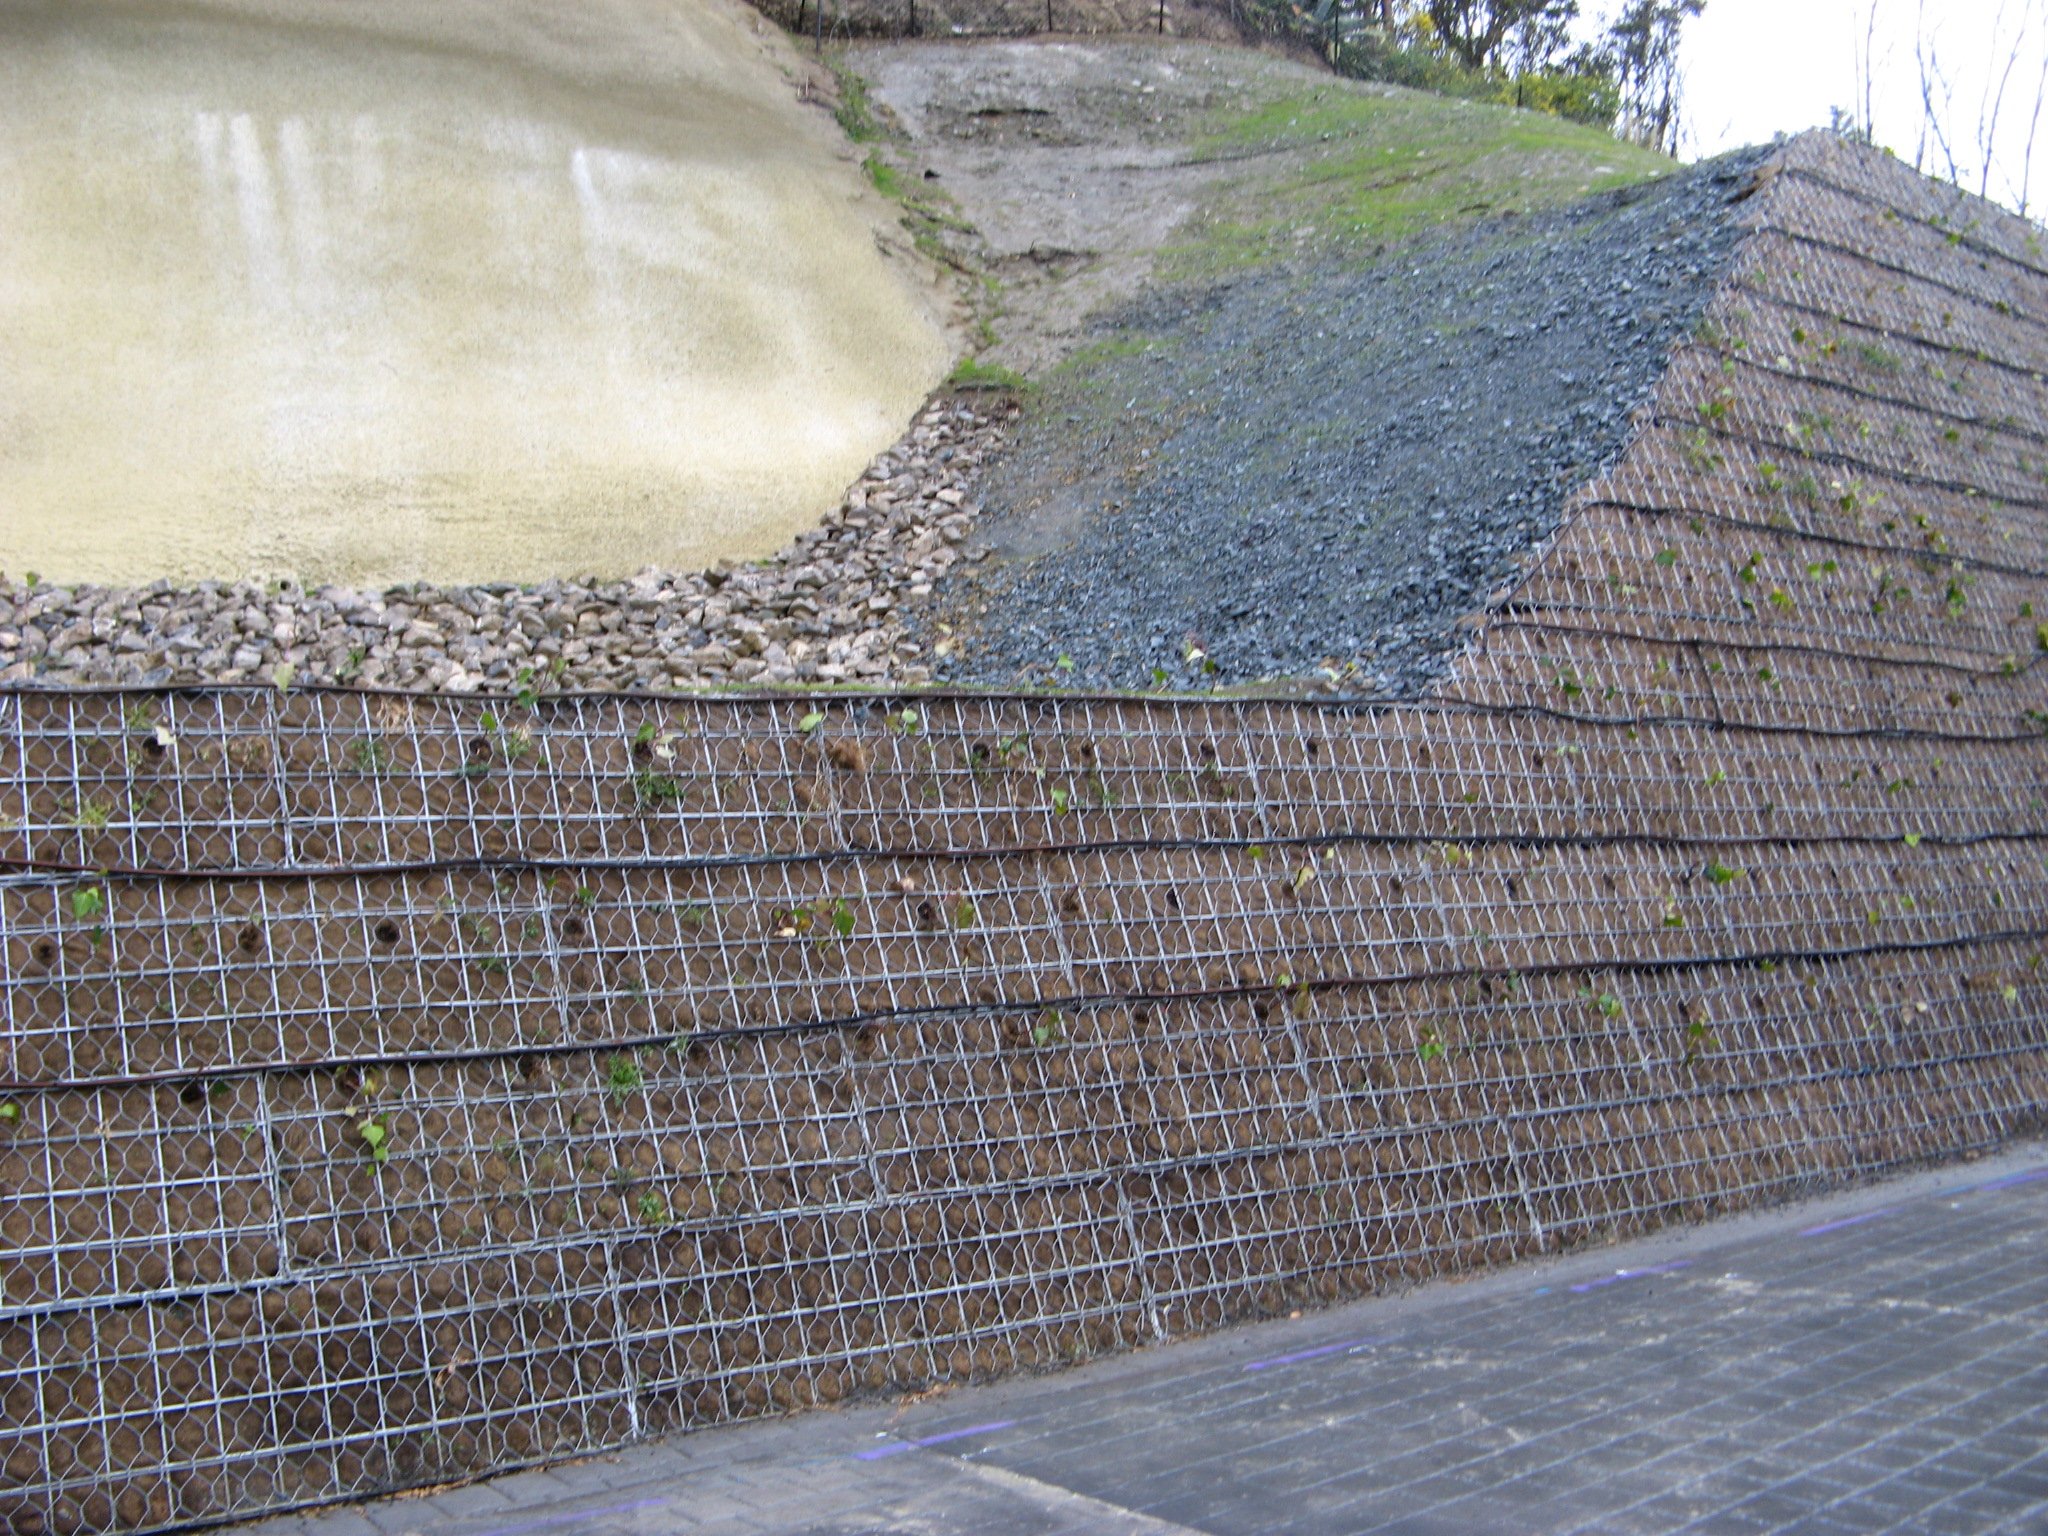  The completed works including a soil nail wall 